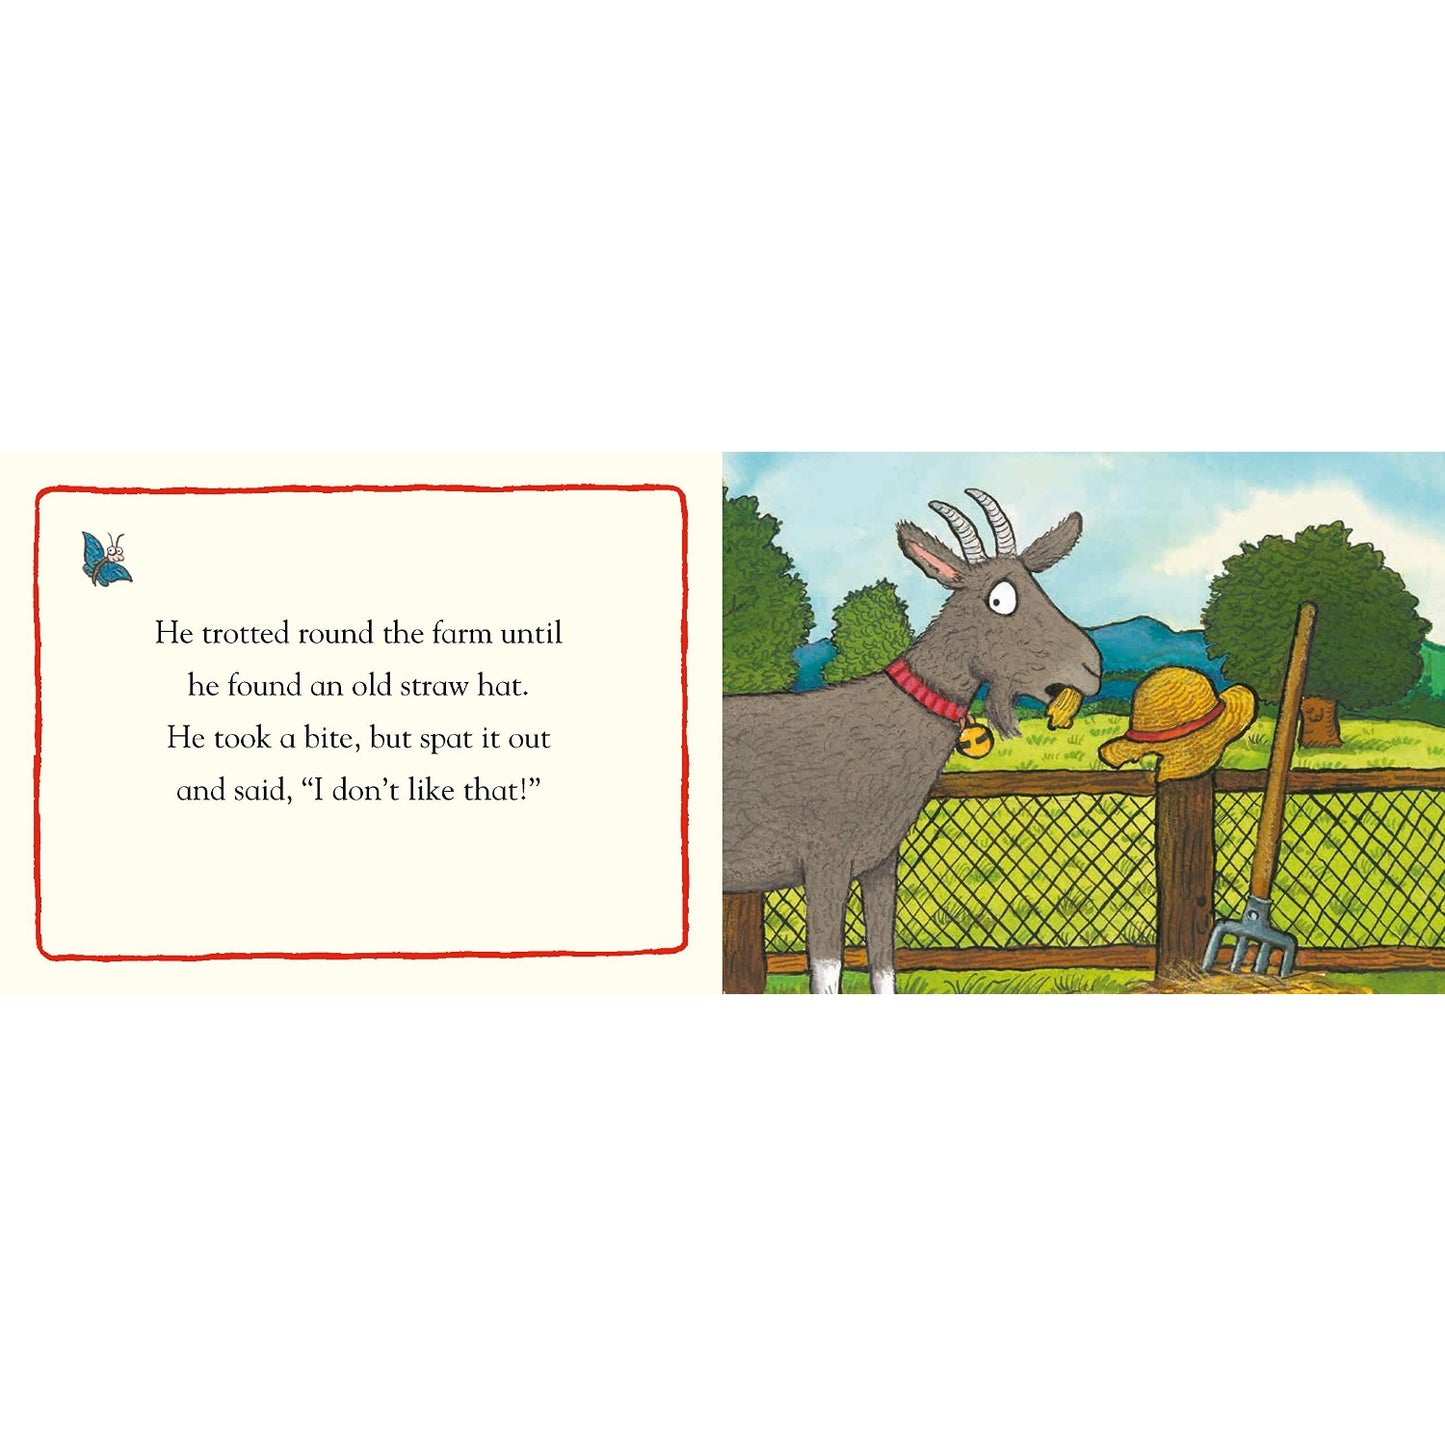 Gobbly Goat - Farmyard Friends | Board Book for Babies & Toddlers